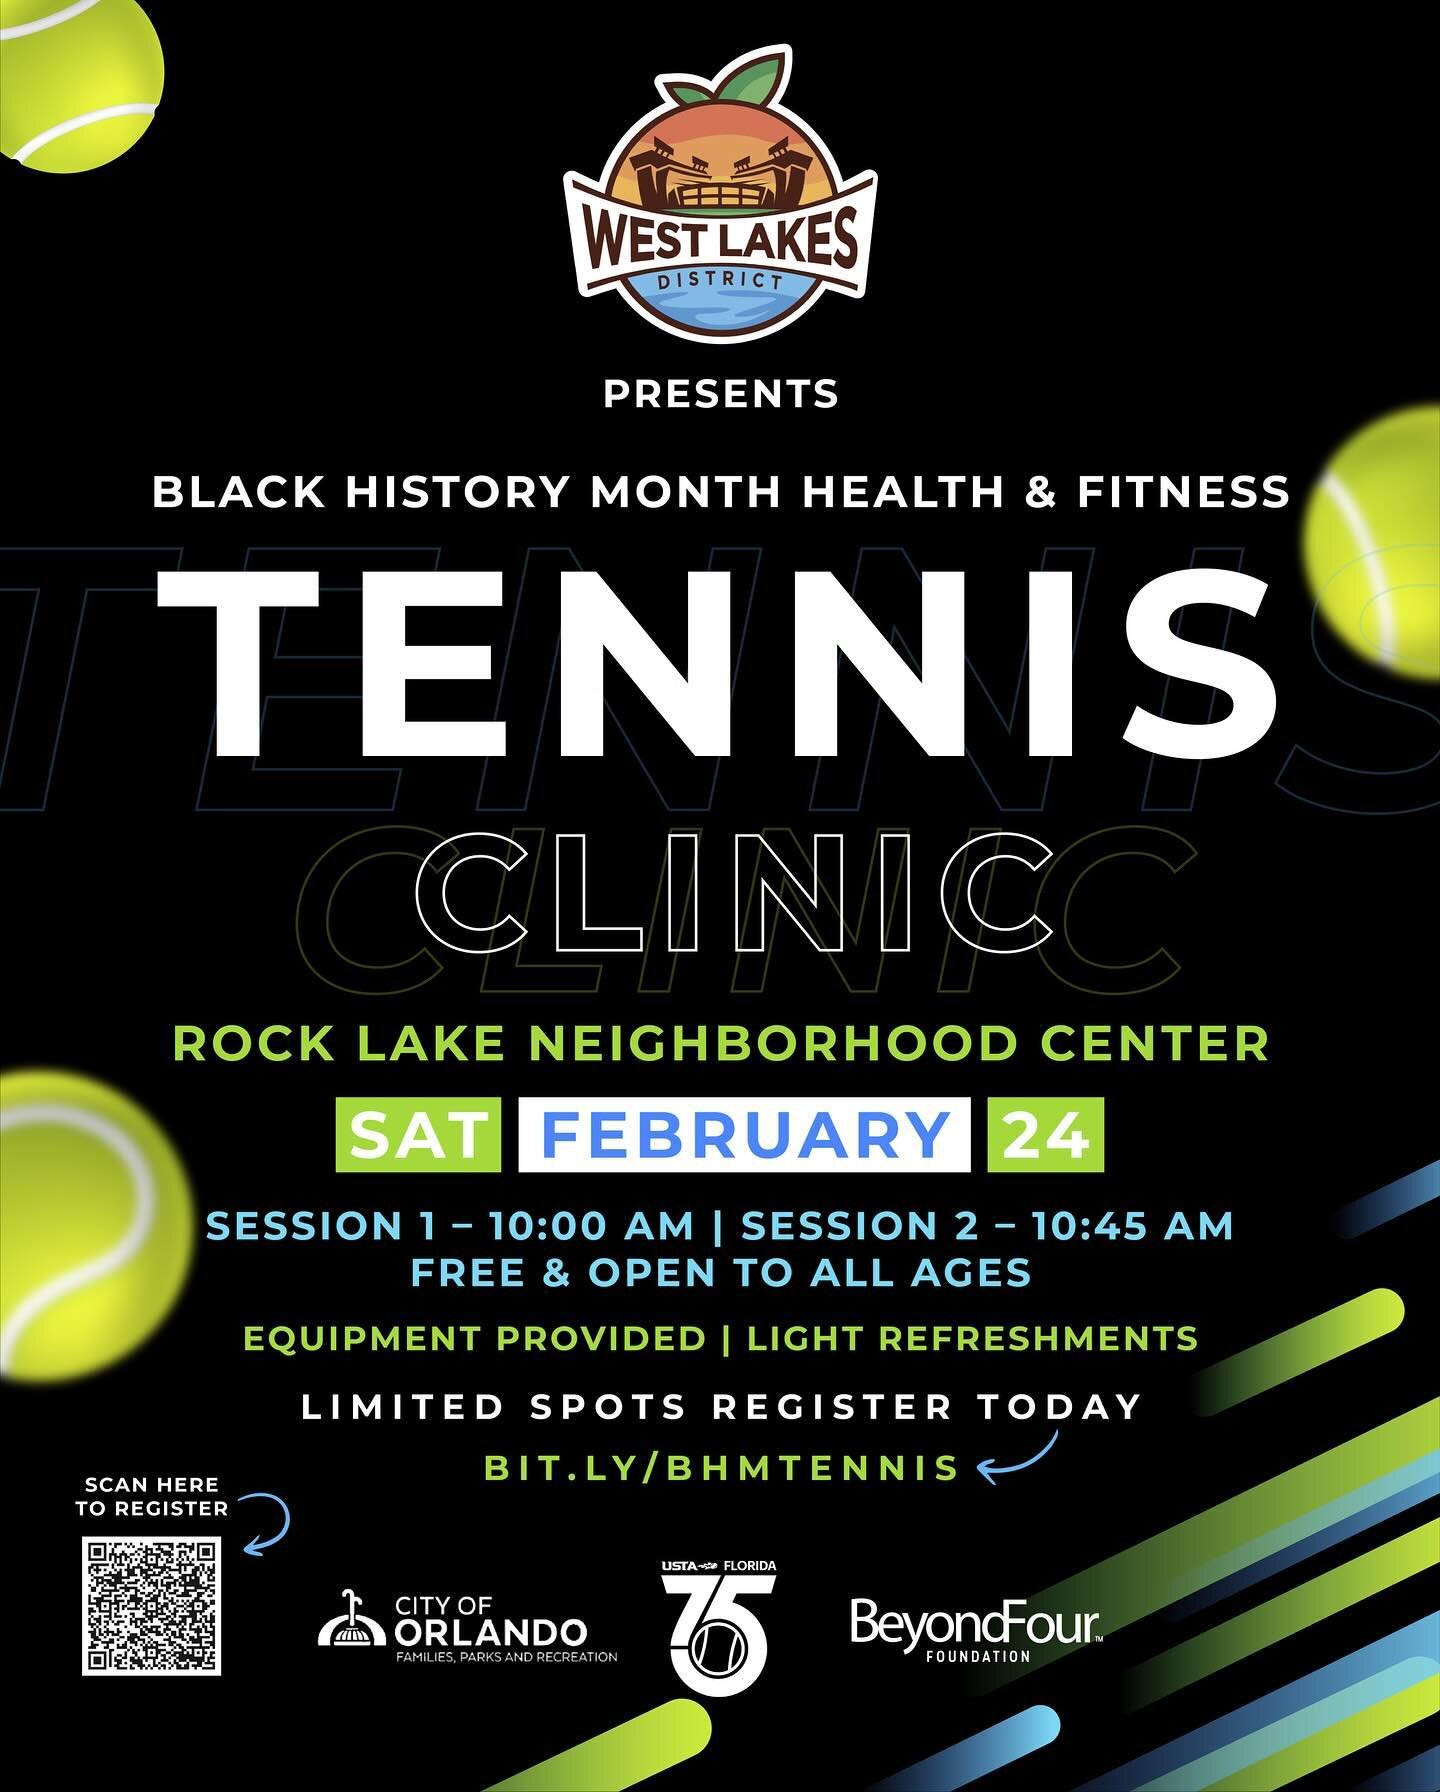 Serving up a fun-filled day of tennis! Join us on Saturday, Feb 24th, at the Rock Lake Neighborhood Center as we celebrate #BlackHistoryMonth with a Health &amp; Fitness Tennis Clinic brought to you by @westlakesdistrict in partnership with @ustaflor